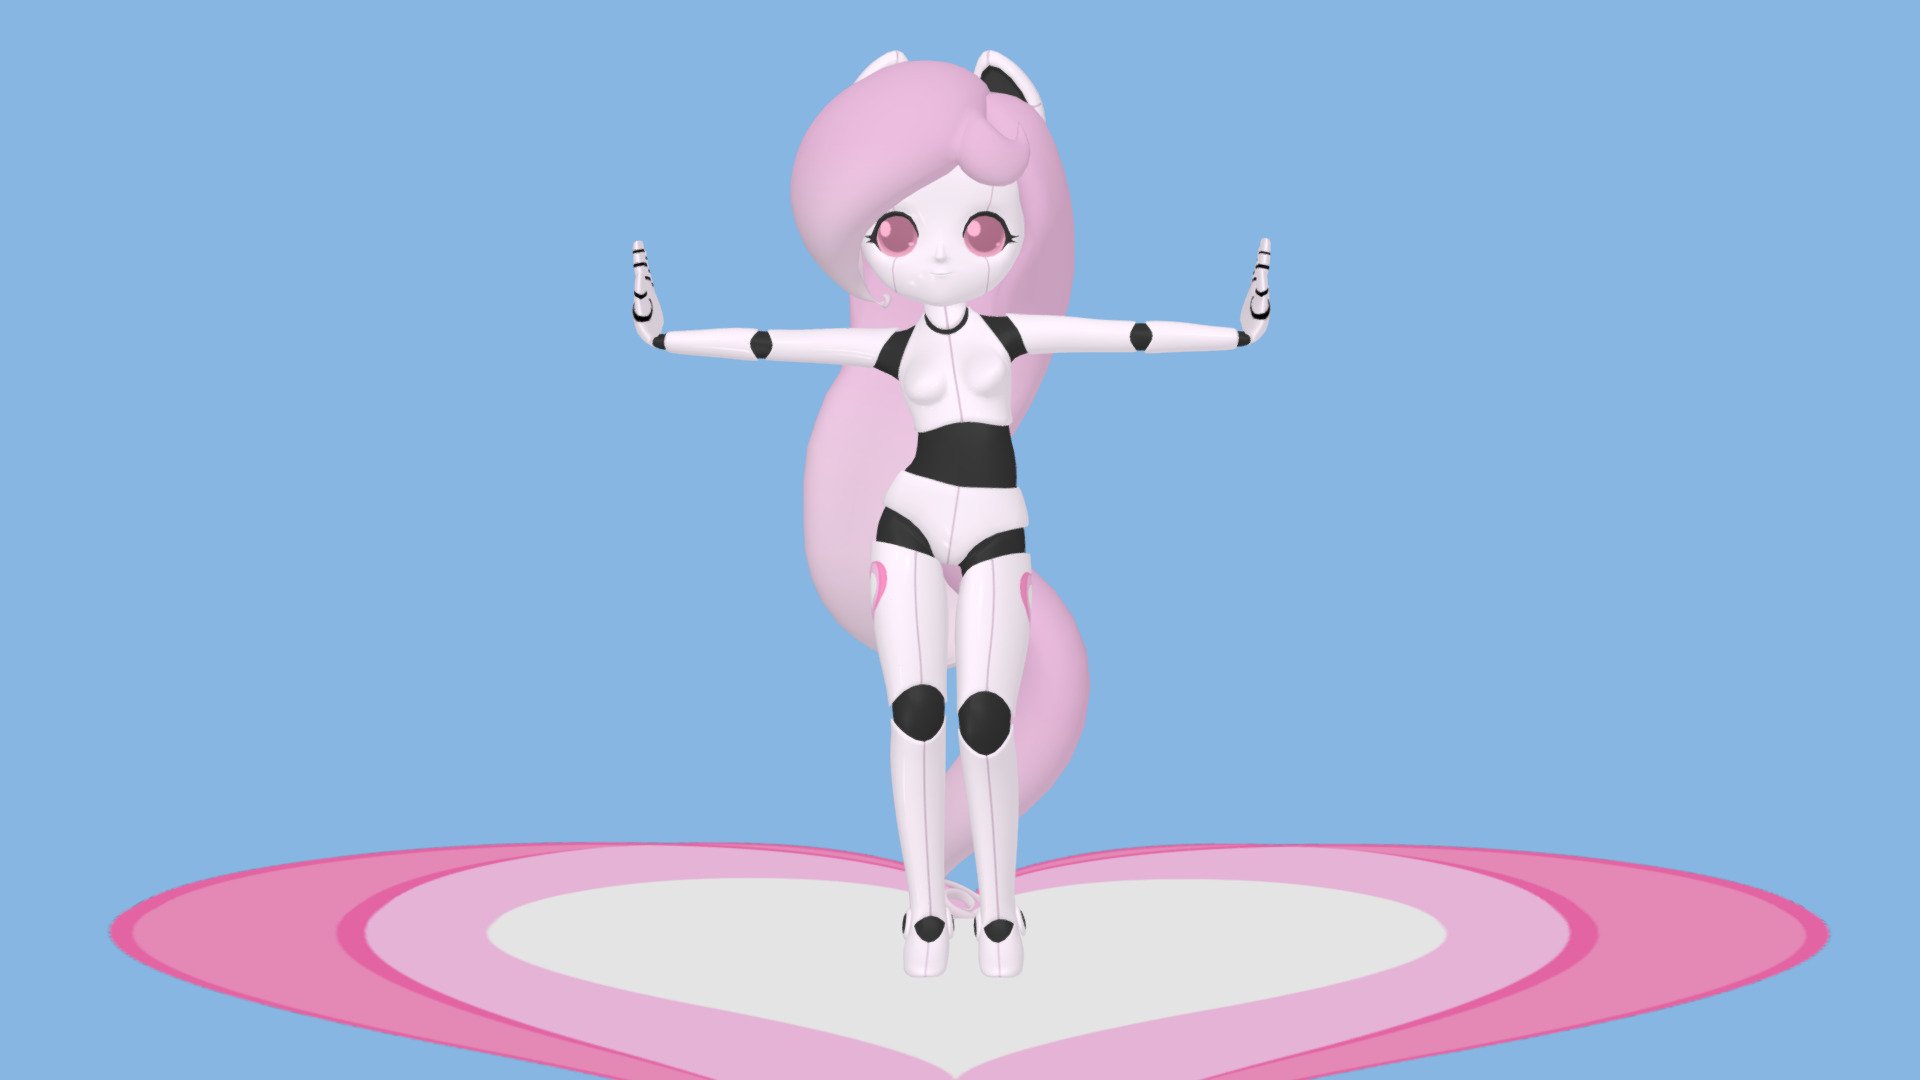 This is a humanoid version of Cyberia Heart, originally a robot pony OC of mine. Her design was heavily inspired by Portal and Sweetie Bot. 

In-universe, she is part of a new line of robots who are able to analyze and mimic emotions from sentient beings. She follows a modified version of Asimov's three laws of robotics, and is under currently observation by a robopsychologist.

Her first artwork was posted on February 14, 2013. As such, Valentine's Day is her production date/birthday! - Cyberia Heart - 3D model by Jdan-S 3d model